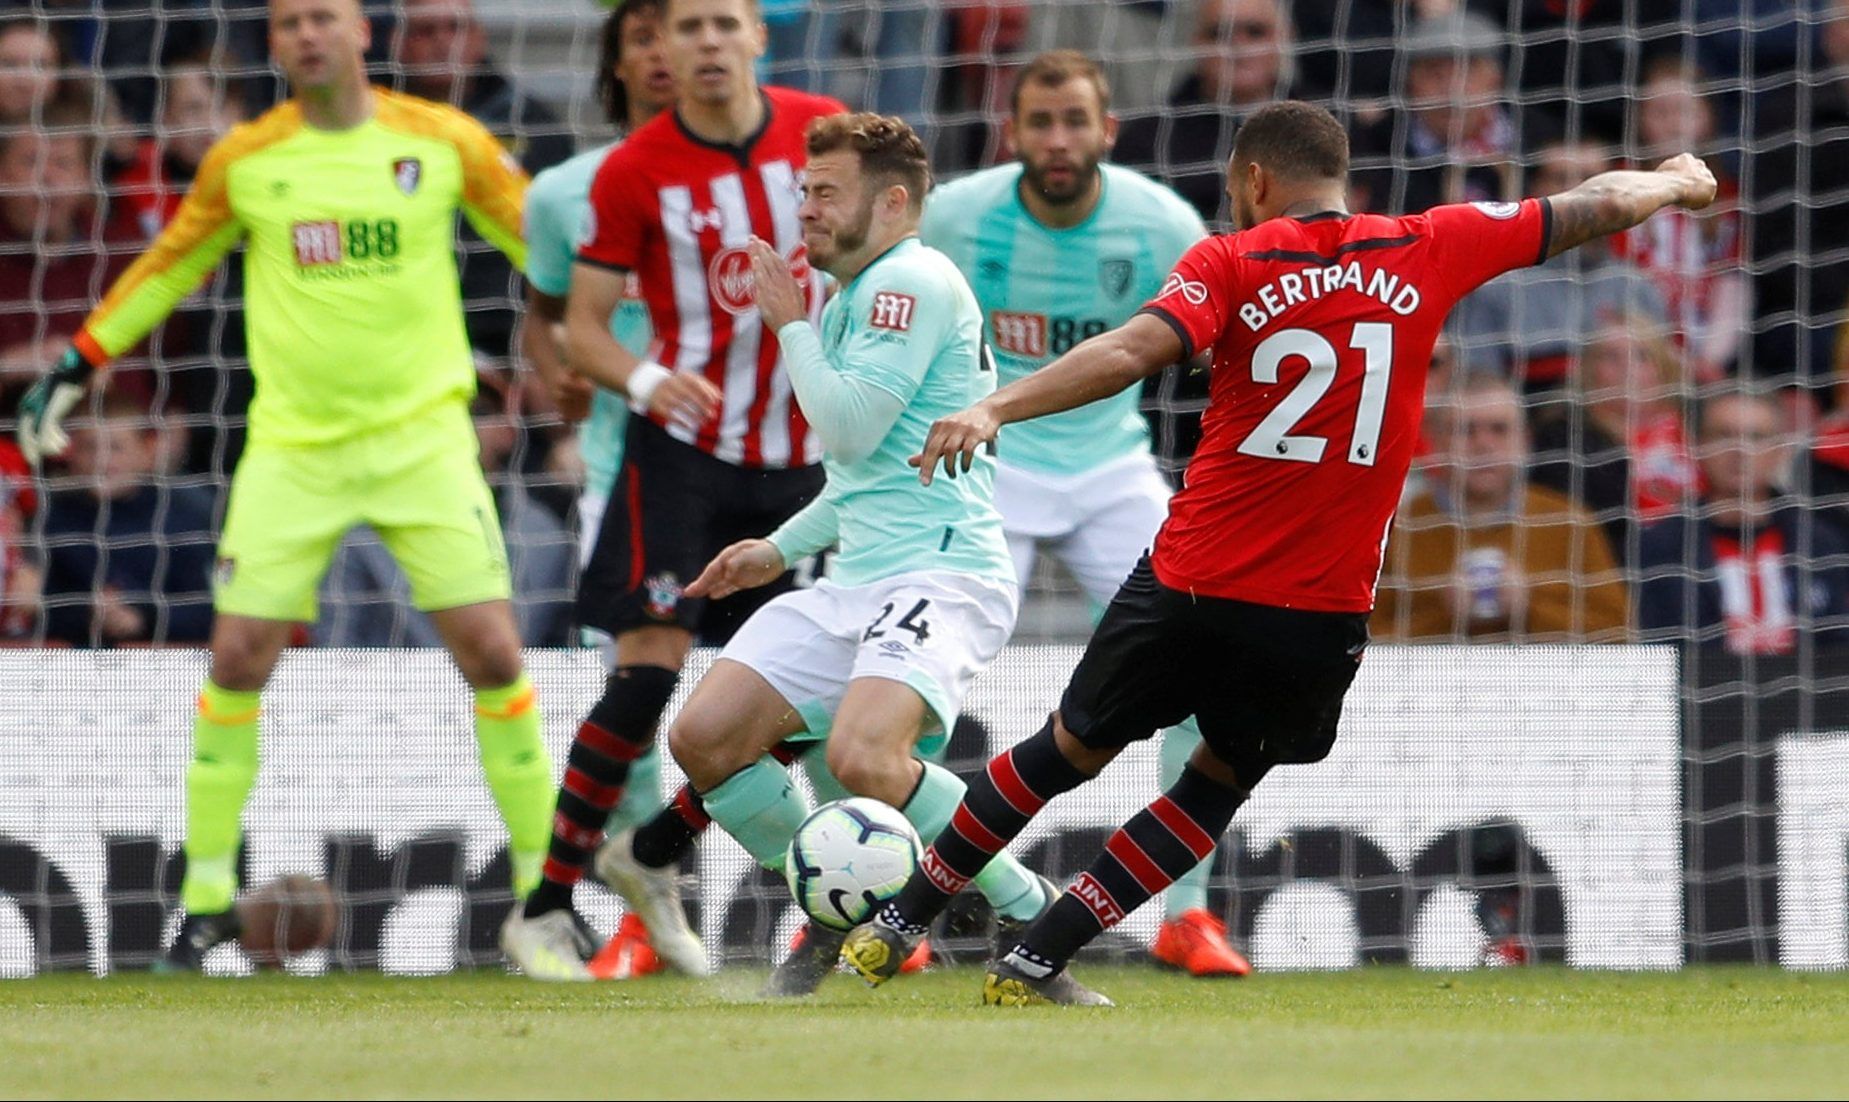 Soccer Football - Premier League - Southampton v AFC Bournemouth - St Mary's Stadium,  Southampton, Britain - April 27, 2019  Southampton's Ryan Bertrand in action with Bournemouth's Ryan Fraser   REUTERS/Peter Nicholls  EDITORIAL USE ONLY. No use with unauthorized audio, video, data, fixture lists, club/league logos or 